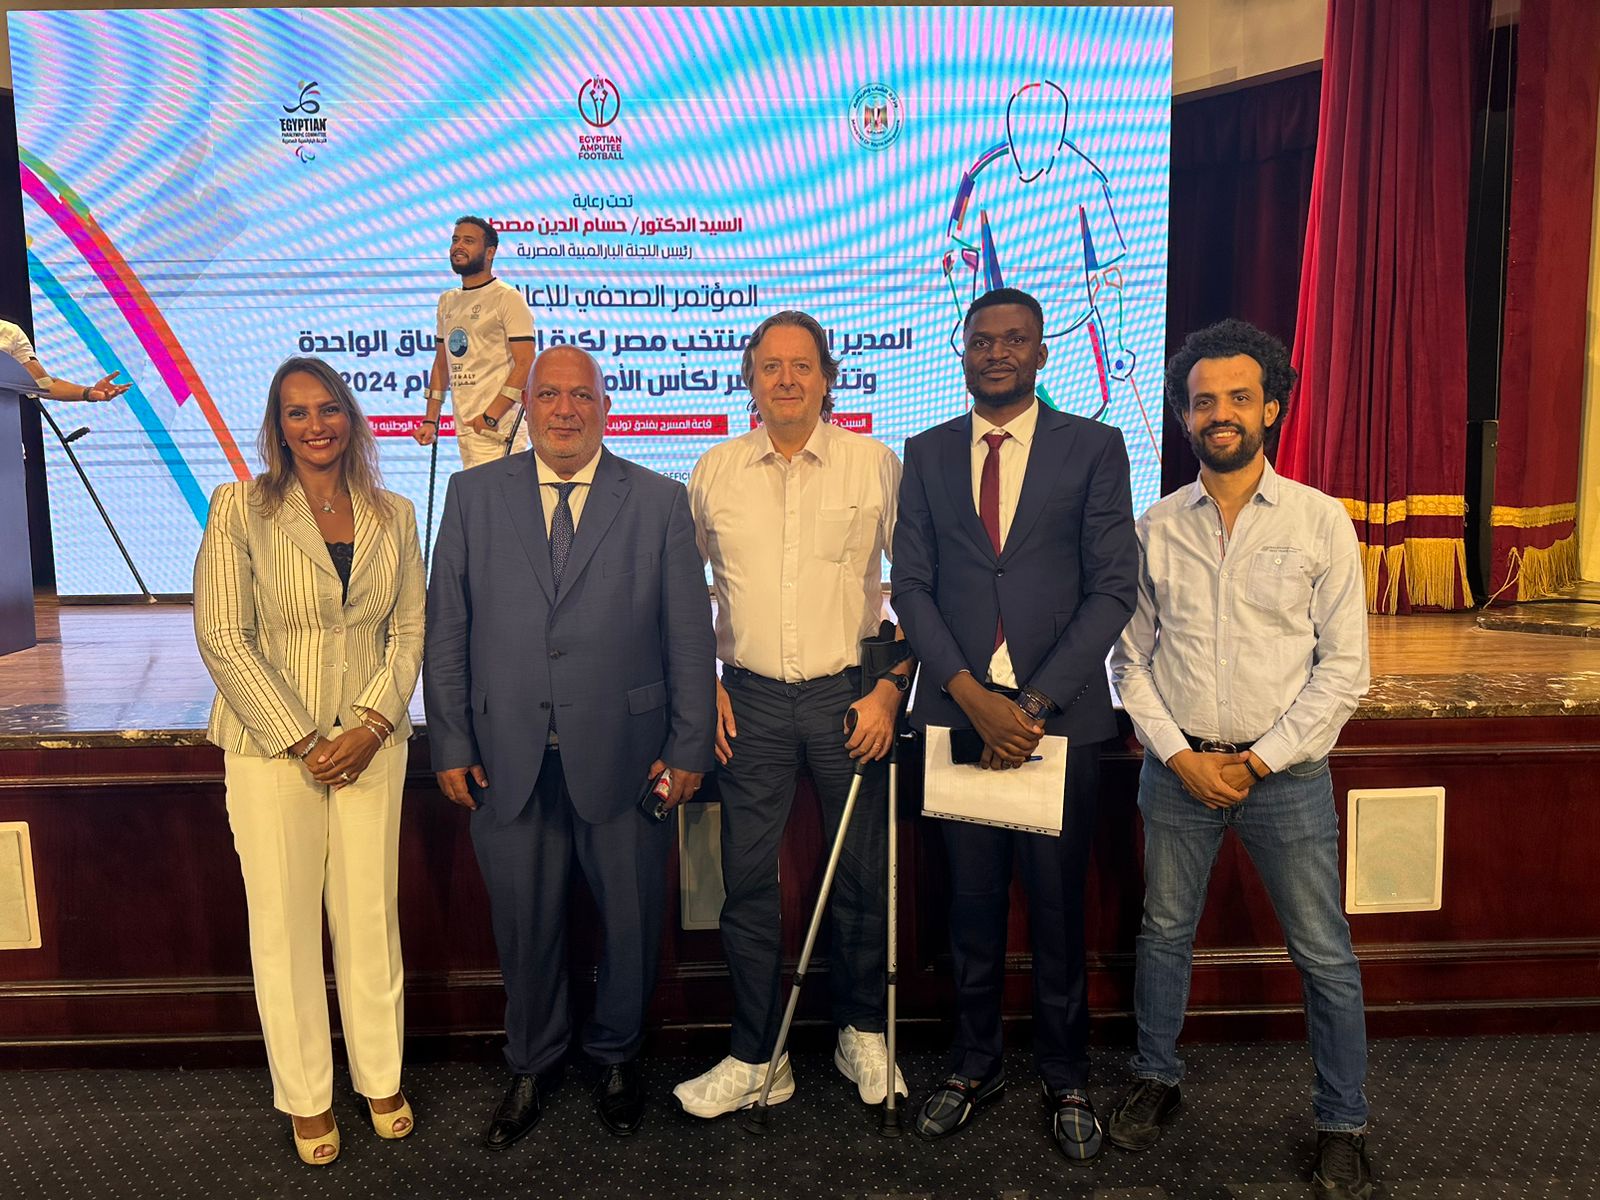 (L-R) Mrs Sarah Ahmed Elmaayrgi, Dr Hossam Elden Mustafa, President of the Egyptian Paralympic Committee; Georg Schlachtenberger, WAFF Secretary General; Mustafa Usman Shalanyuy, Vice President of the Confederation of African Amputee Football (CAAF), and Mohamed Adel Hosni, President of the local organising committee at the press conference.